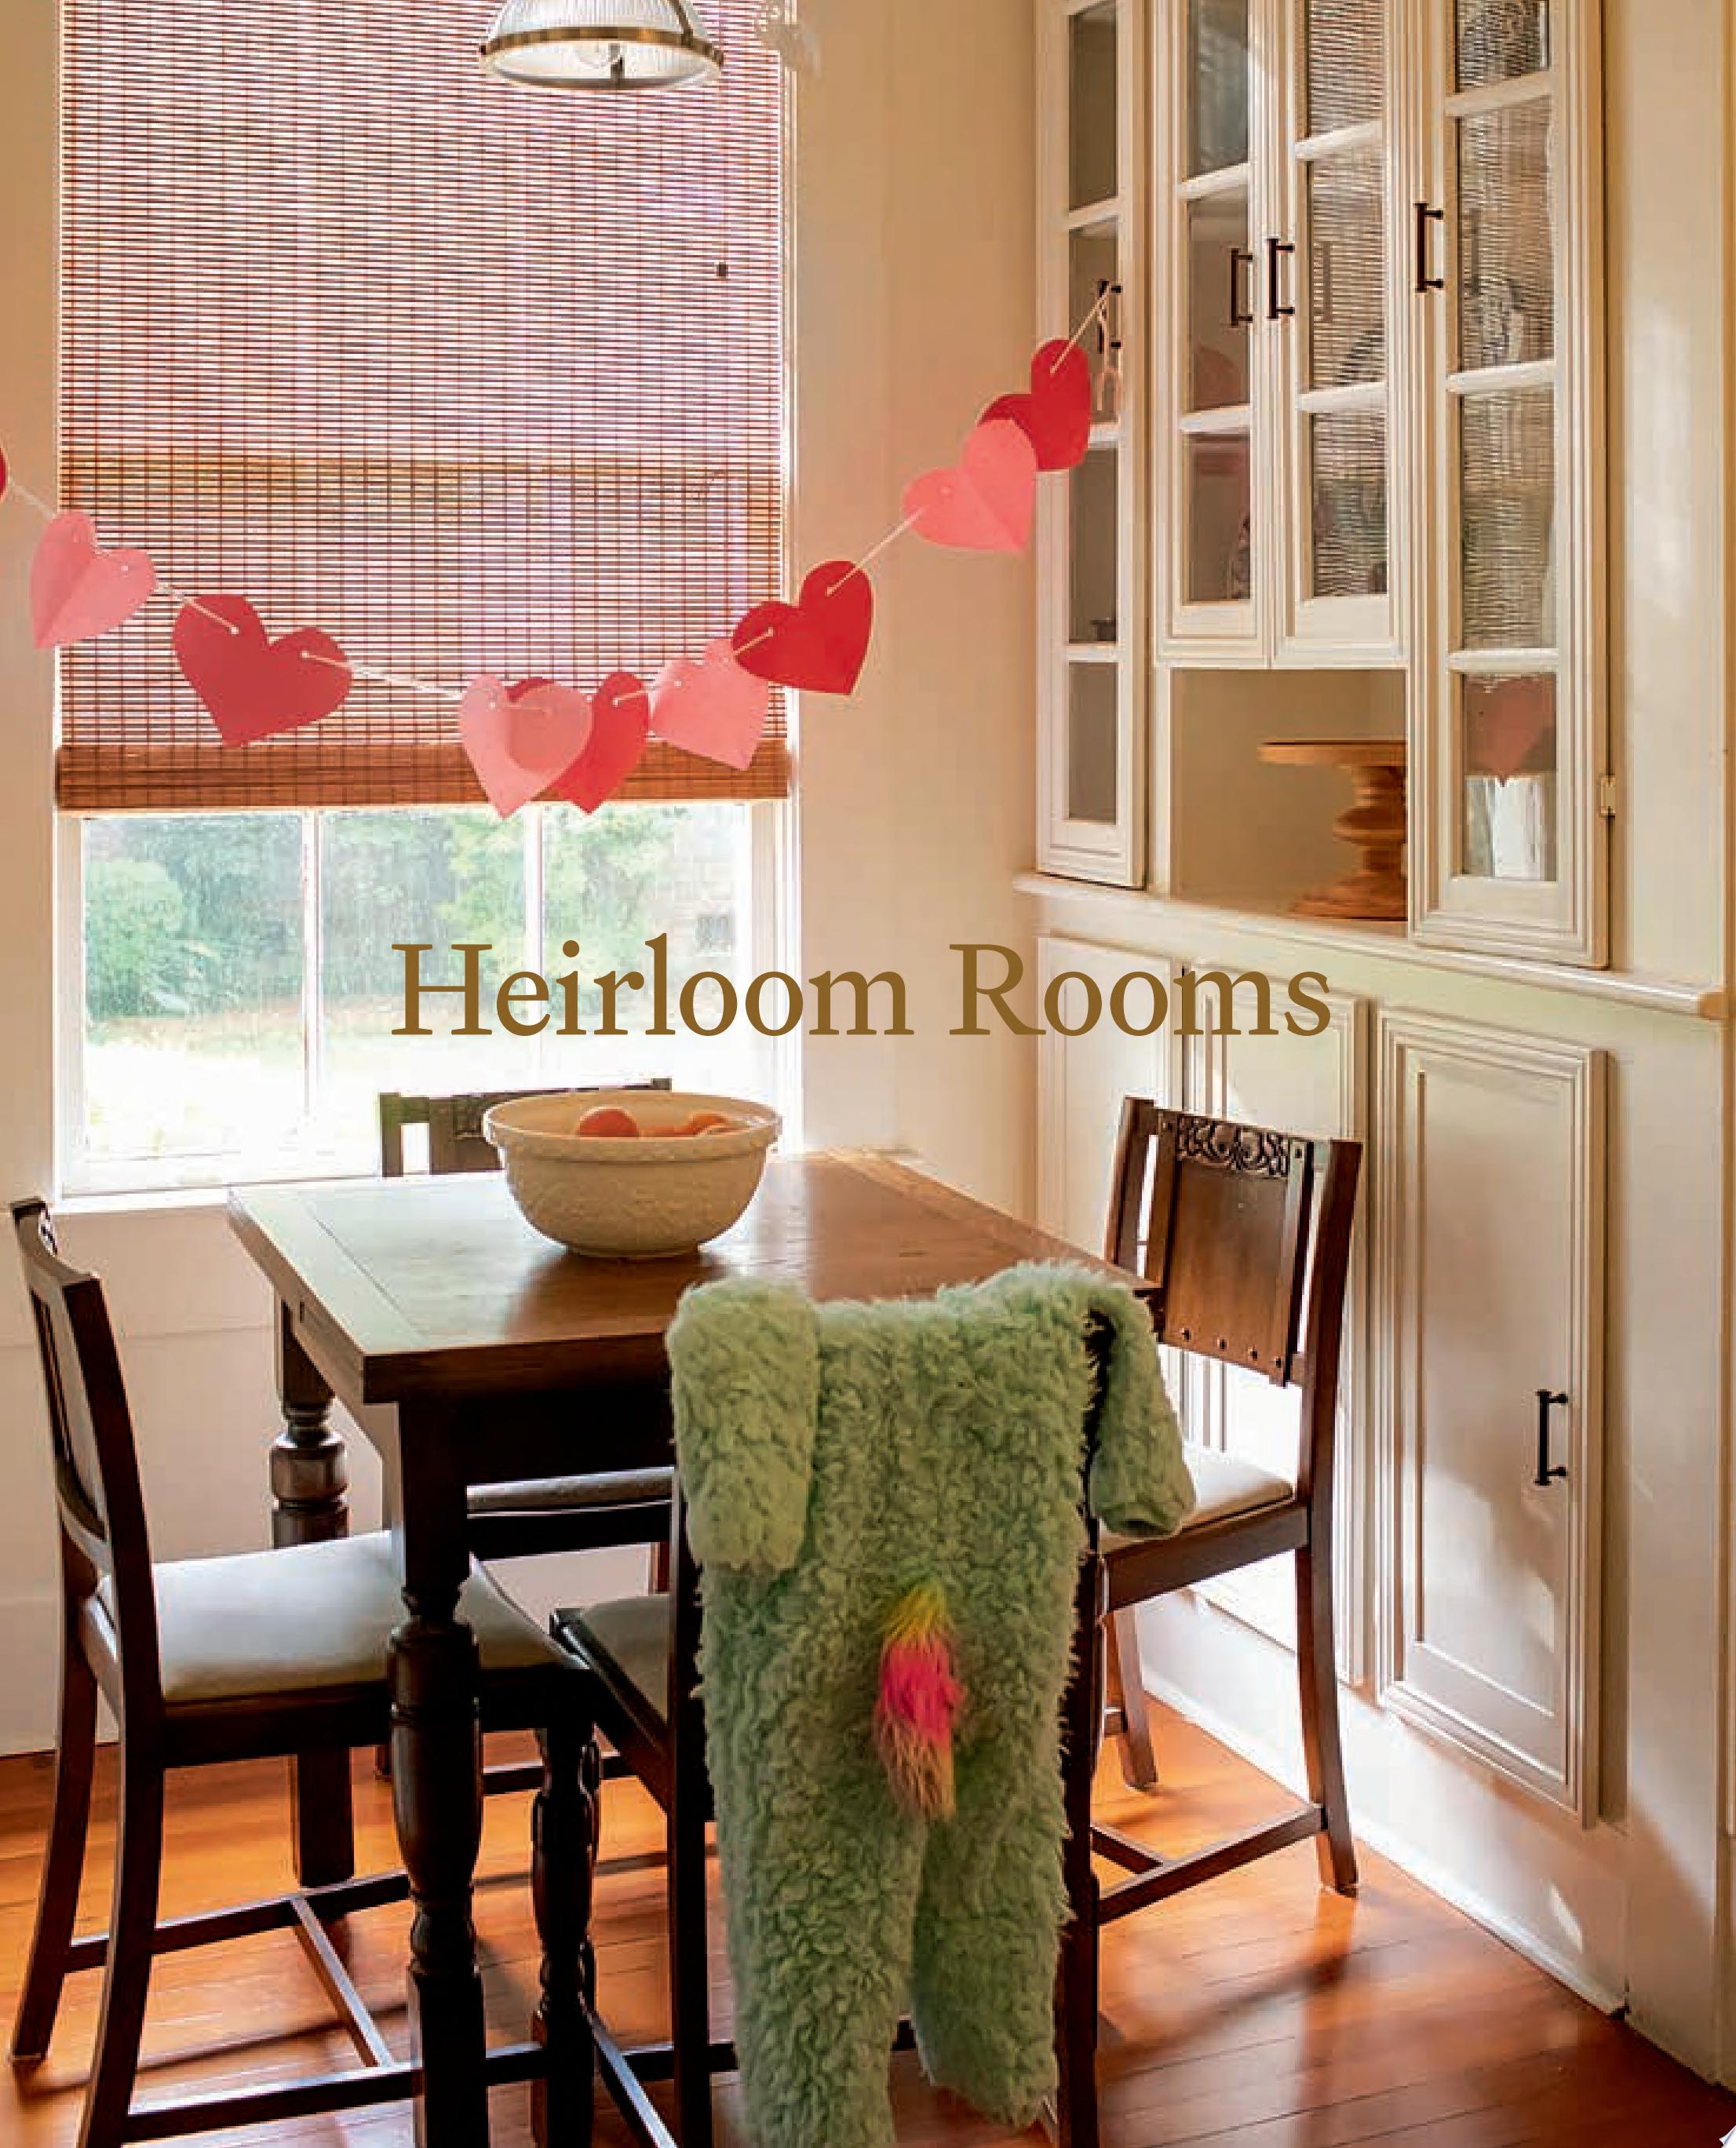 Image for "Heirloom Rooms"